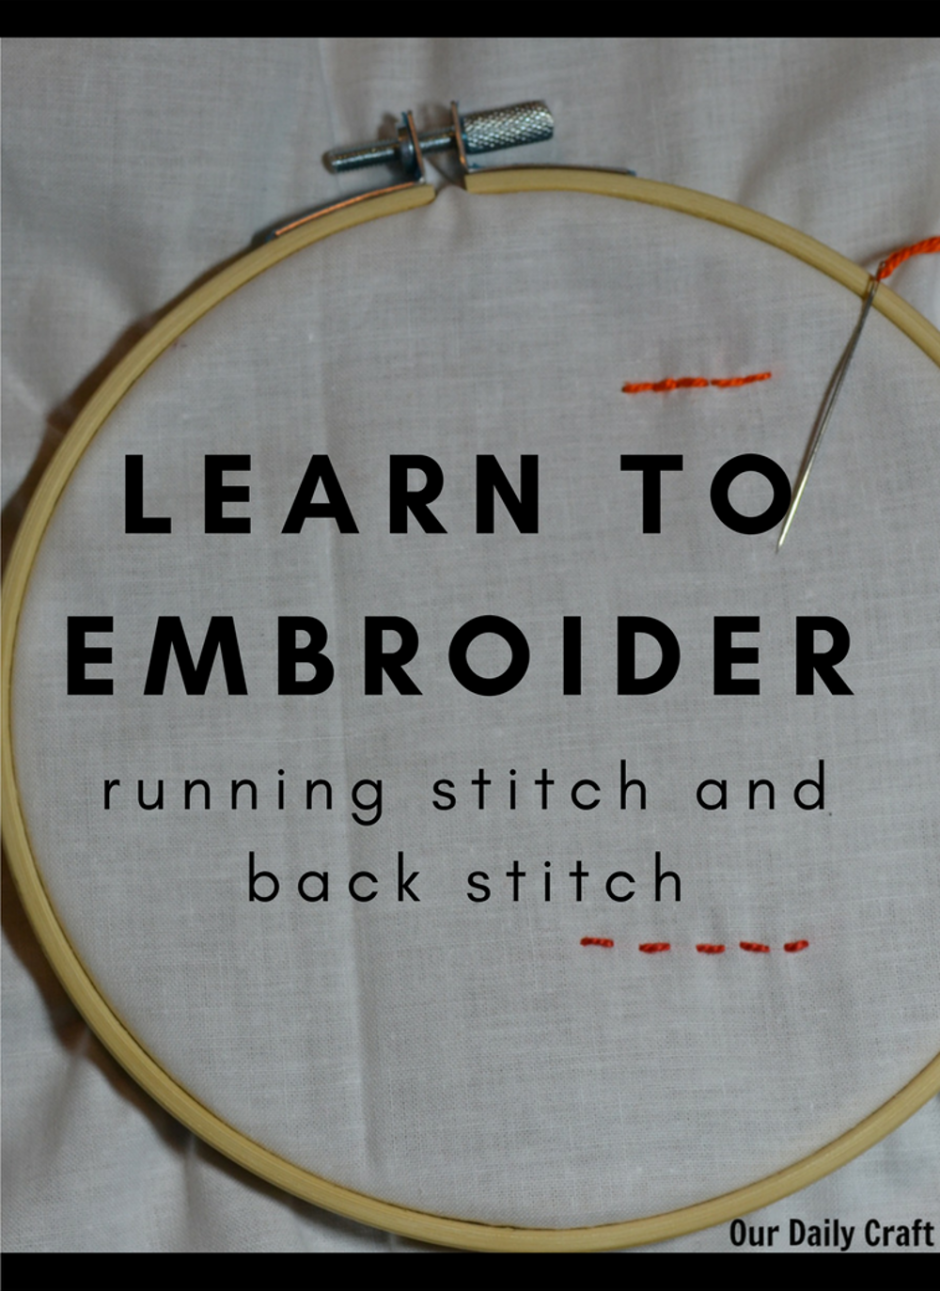 Learn to embroider with basic embroidery sttiches running stitch and back stitch